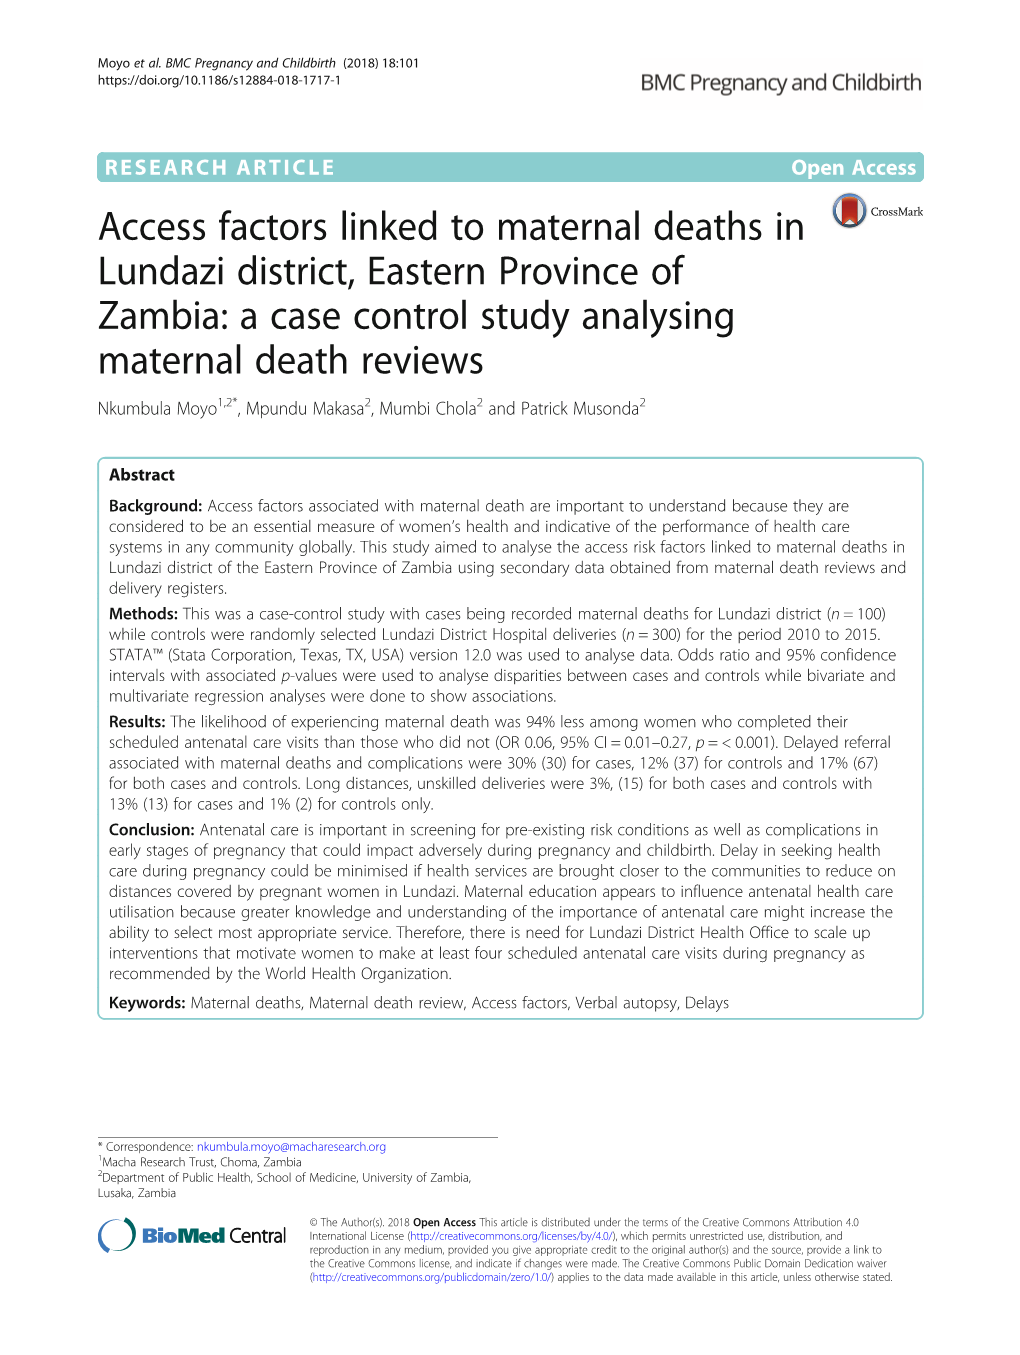 Access Factors Linked to Maternal Deaths in Lundazi District, Eastern